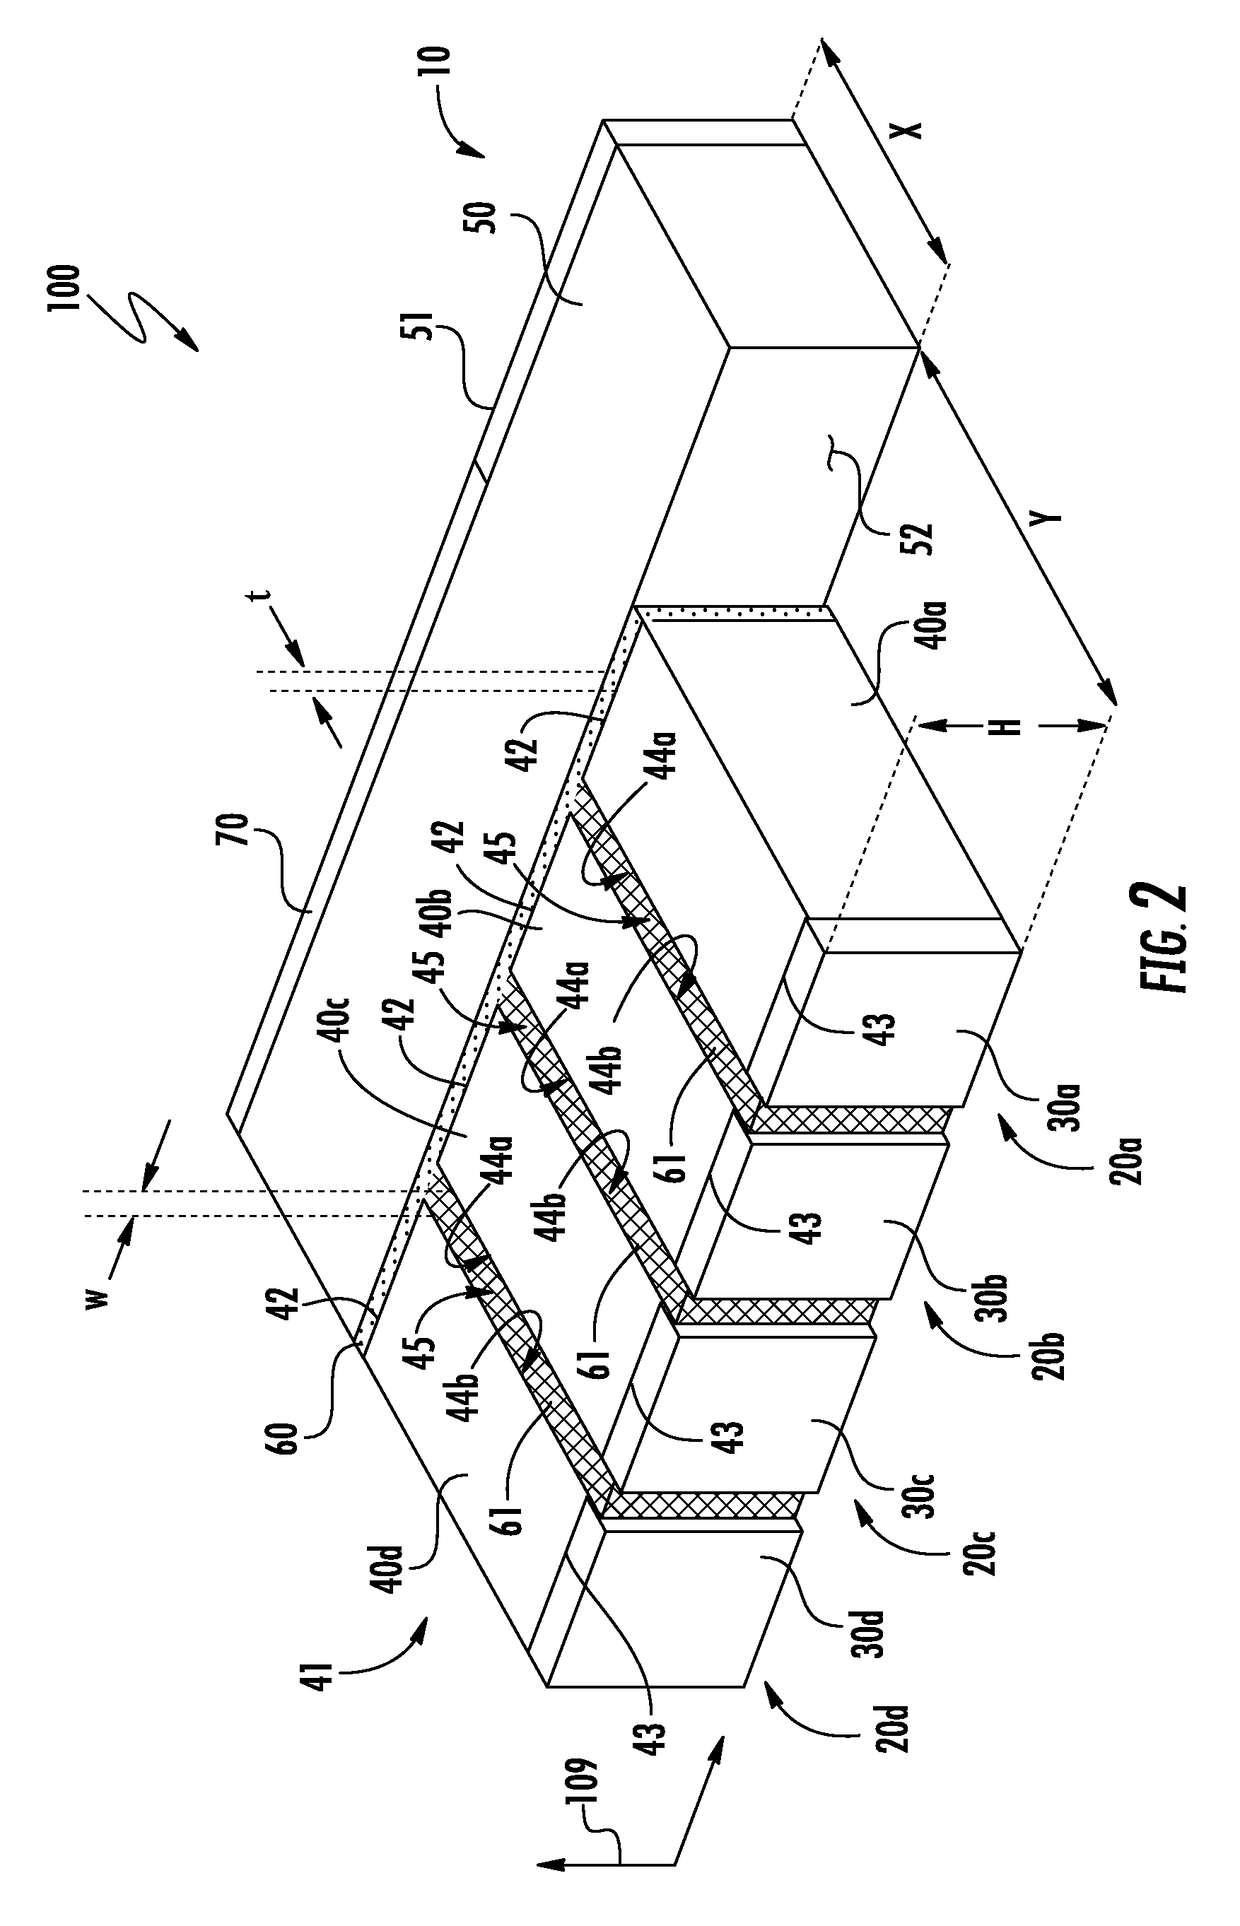 Mux/demux comprising capillary filter block and methods of producing the same